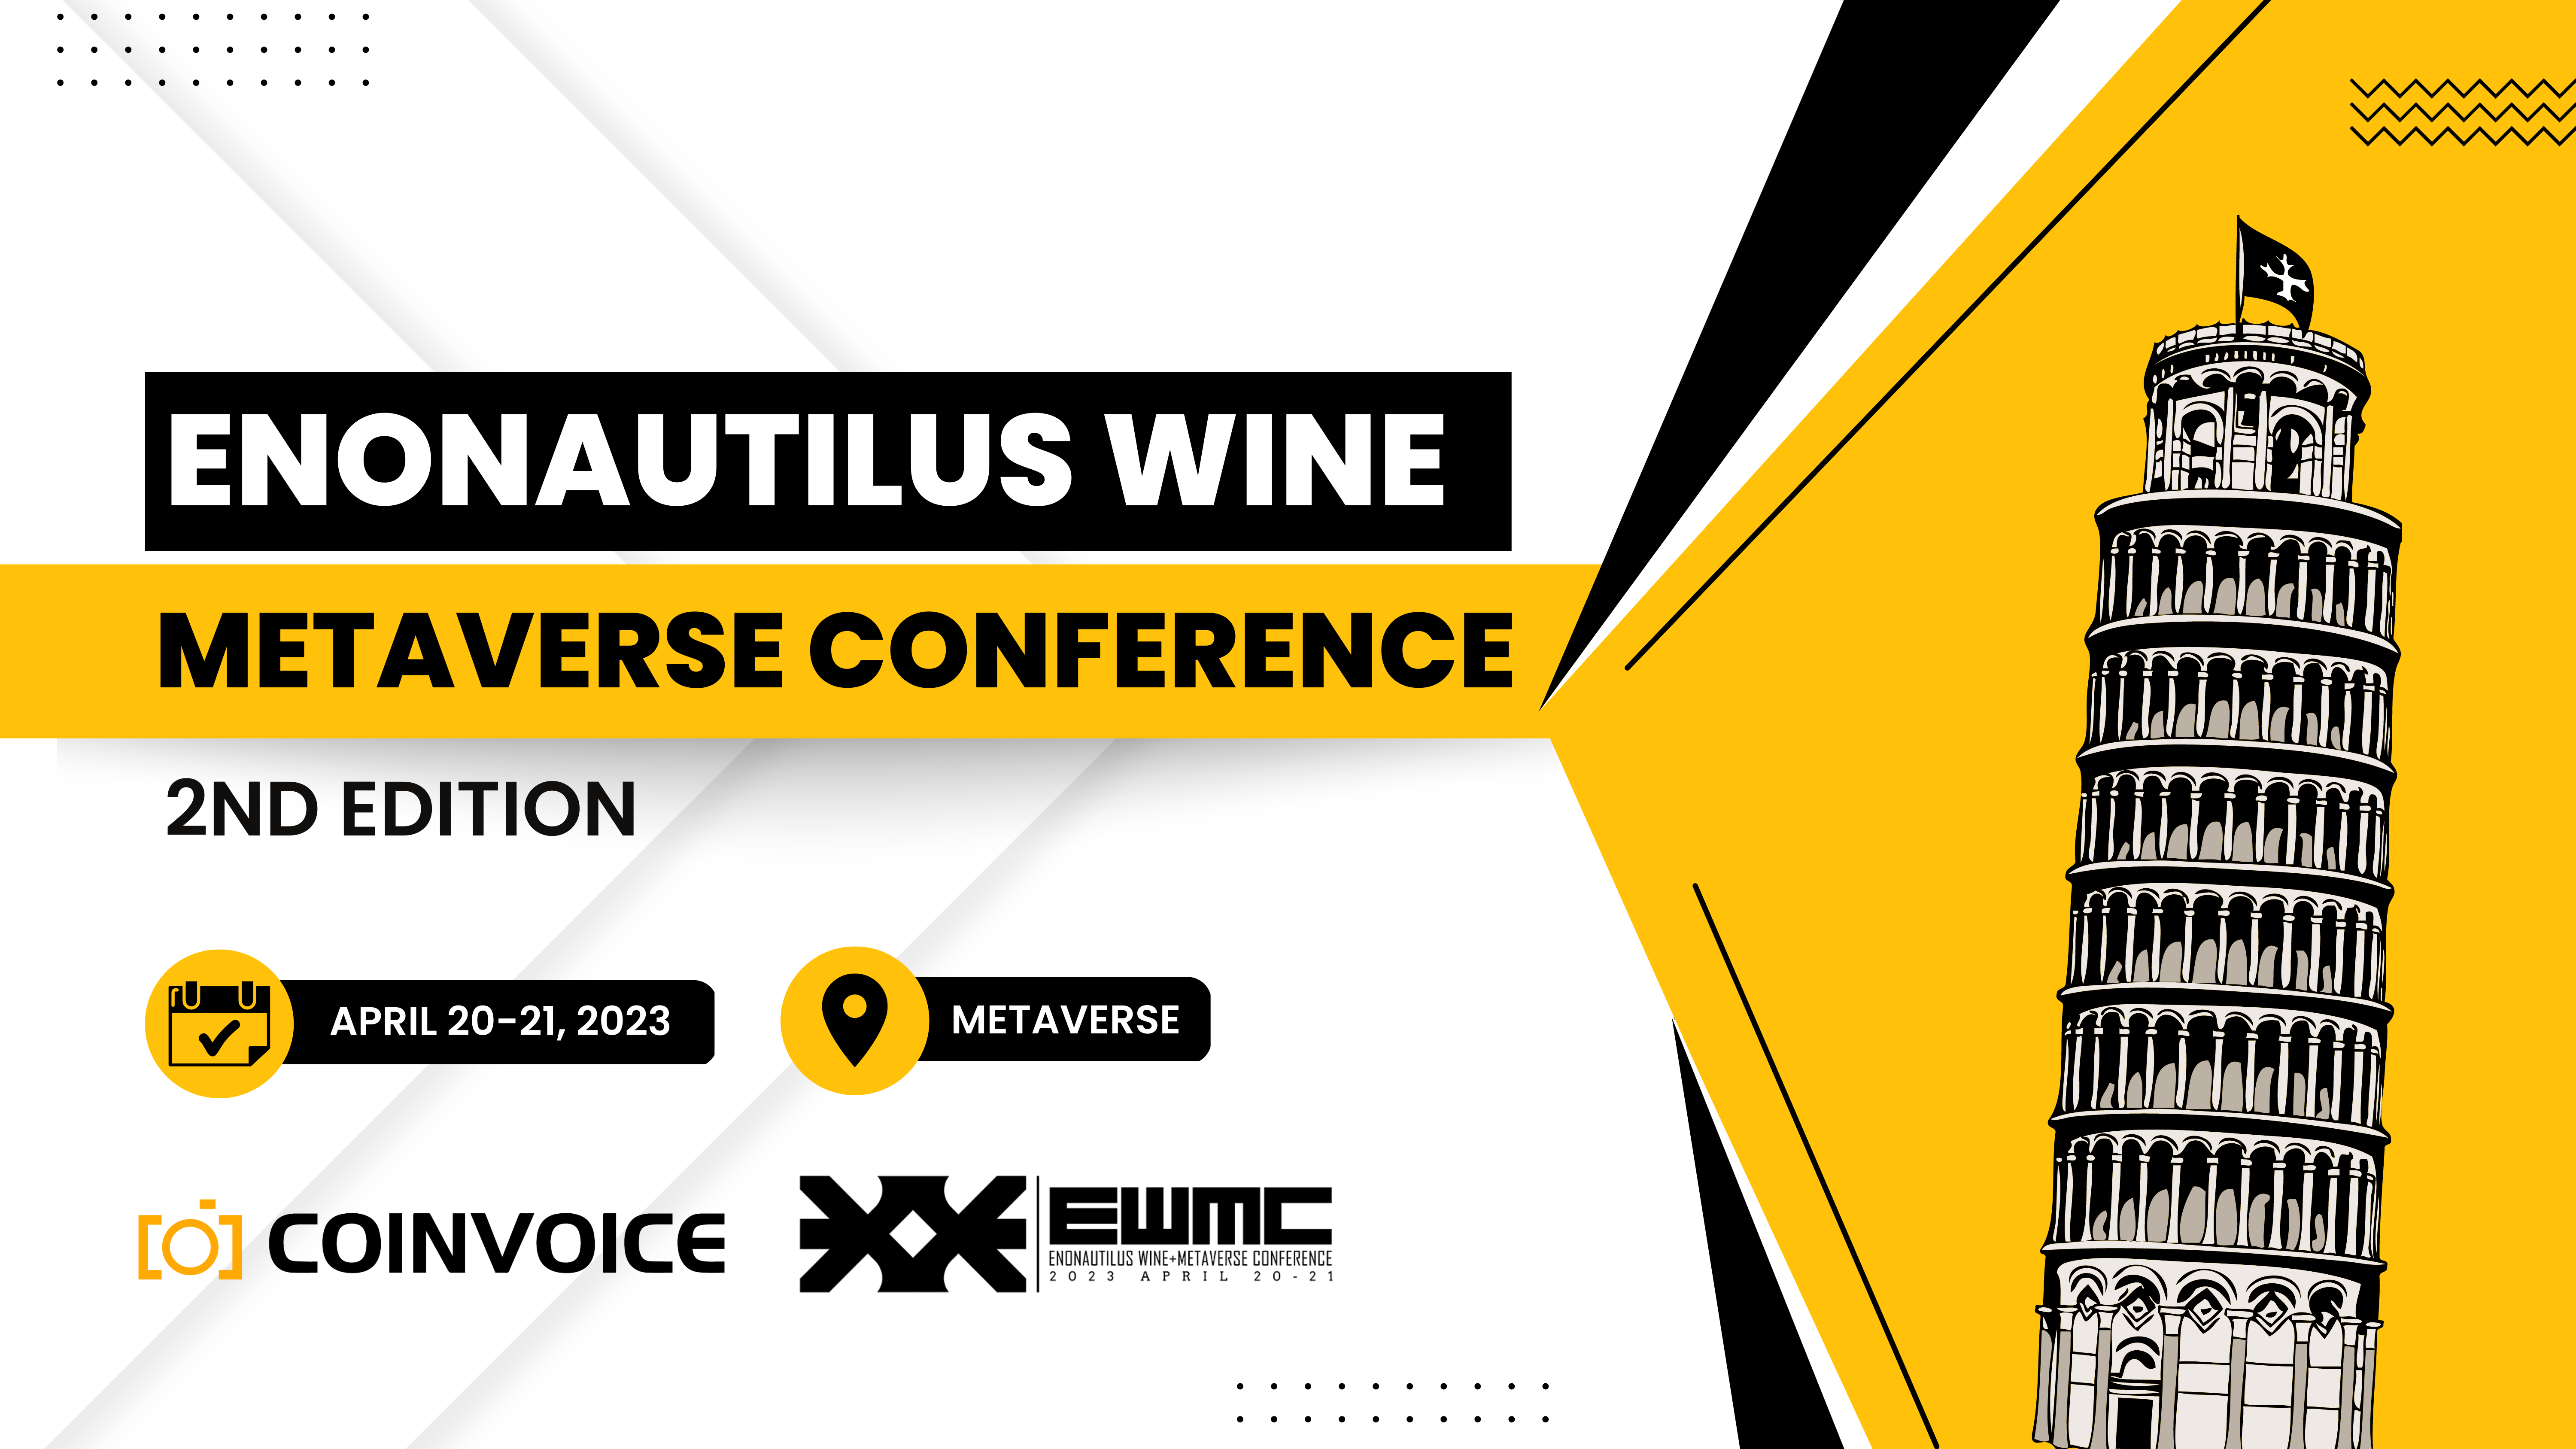 Enonautilus Wine Metaverse Convention, Second Version: The Metaverse Meets The Wine World